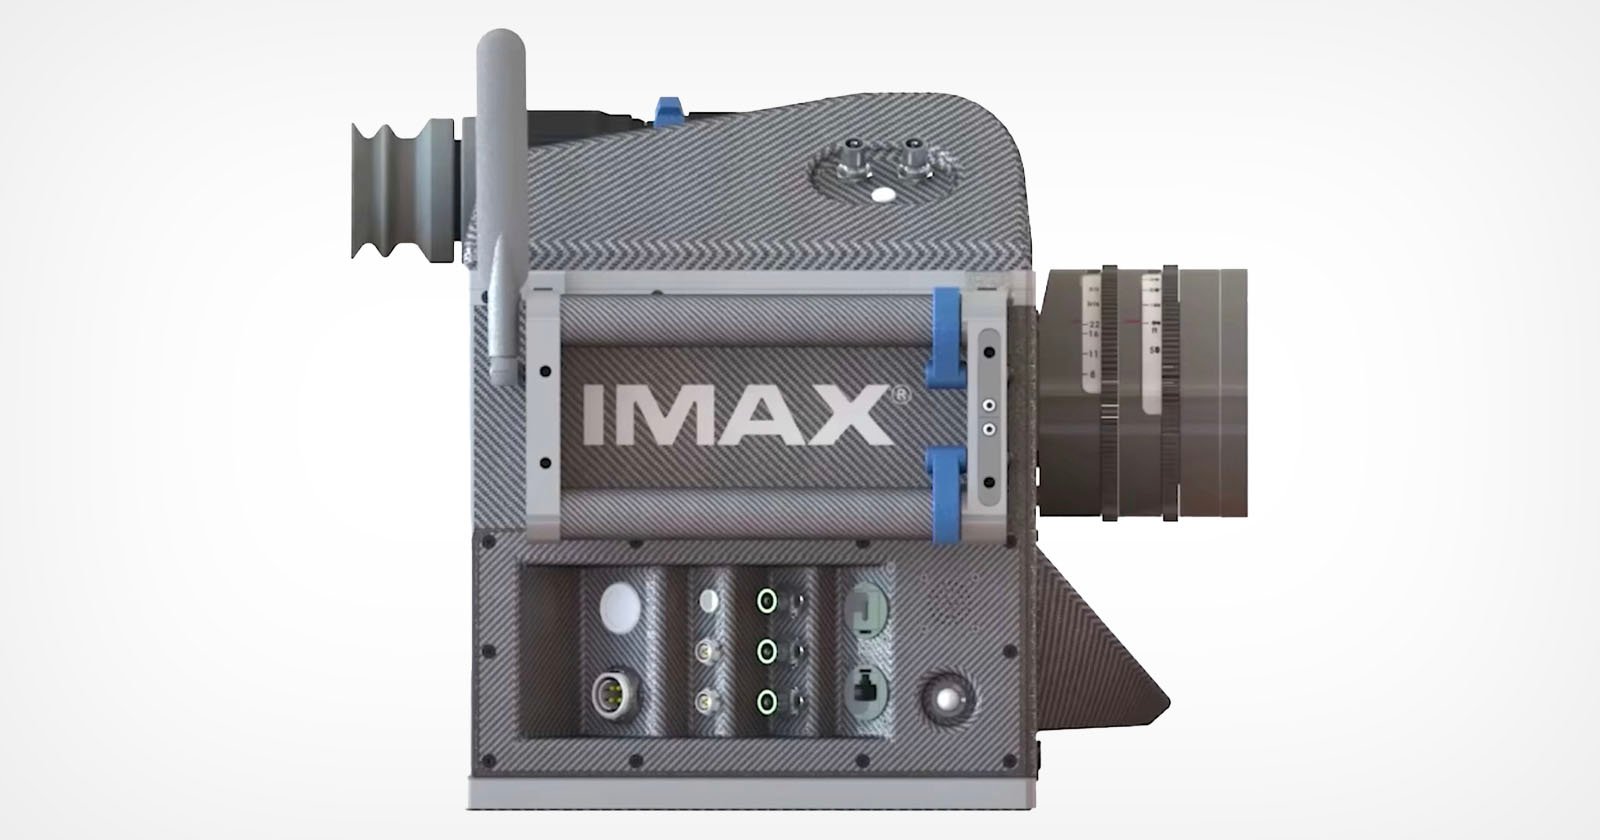 The New Generation of IMAX Cameras are More User Friendly